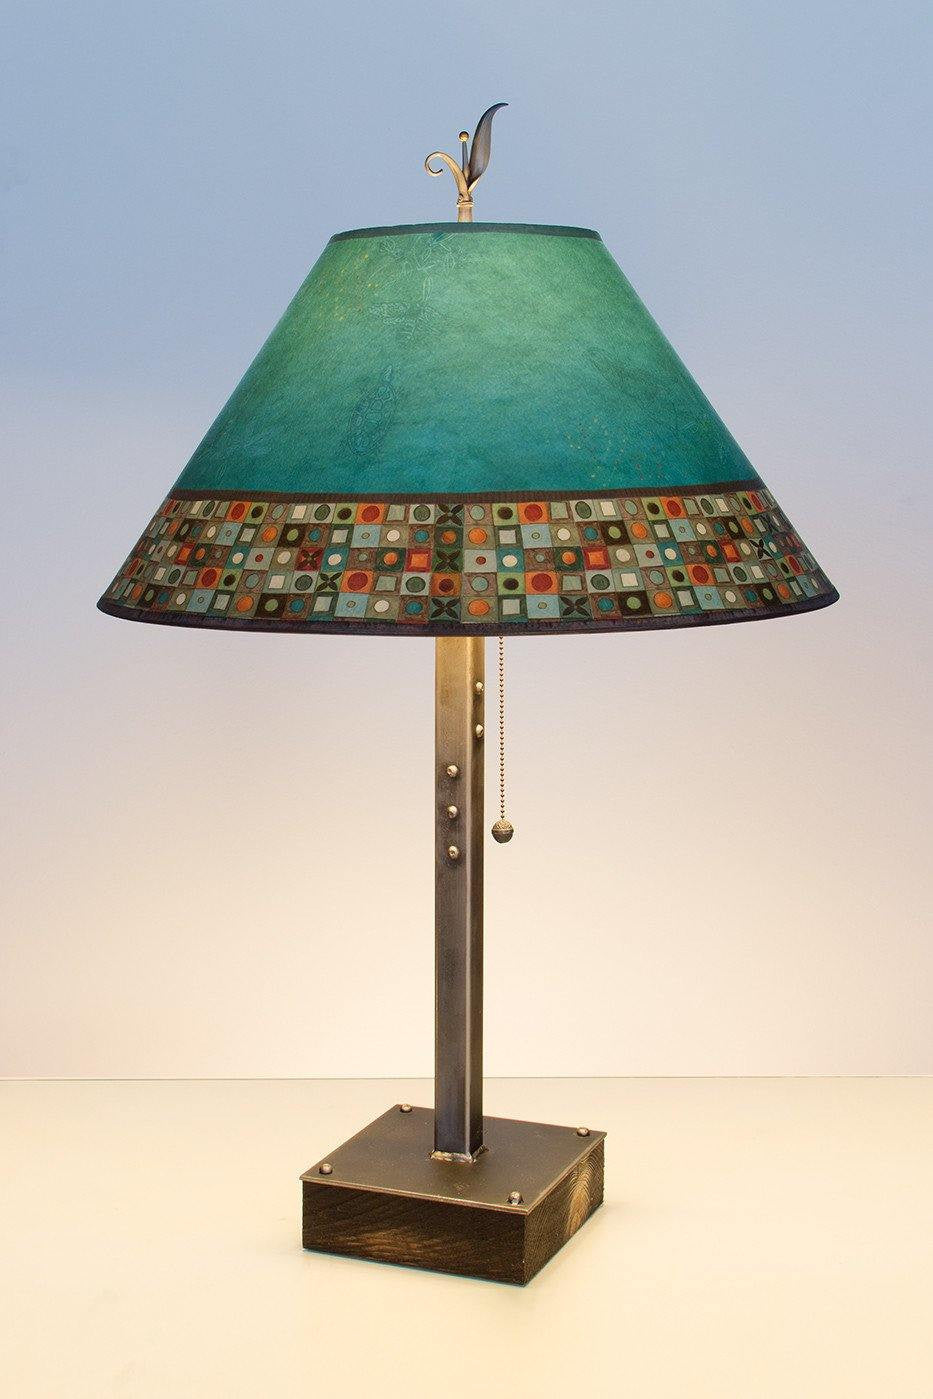 Janna Ugone &amp; Co Table Lamps Steel Table Lamp on Wood with Large Conical Shade in Jade Mosaic